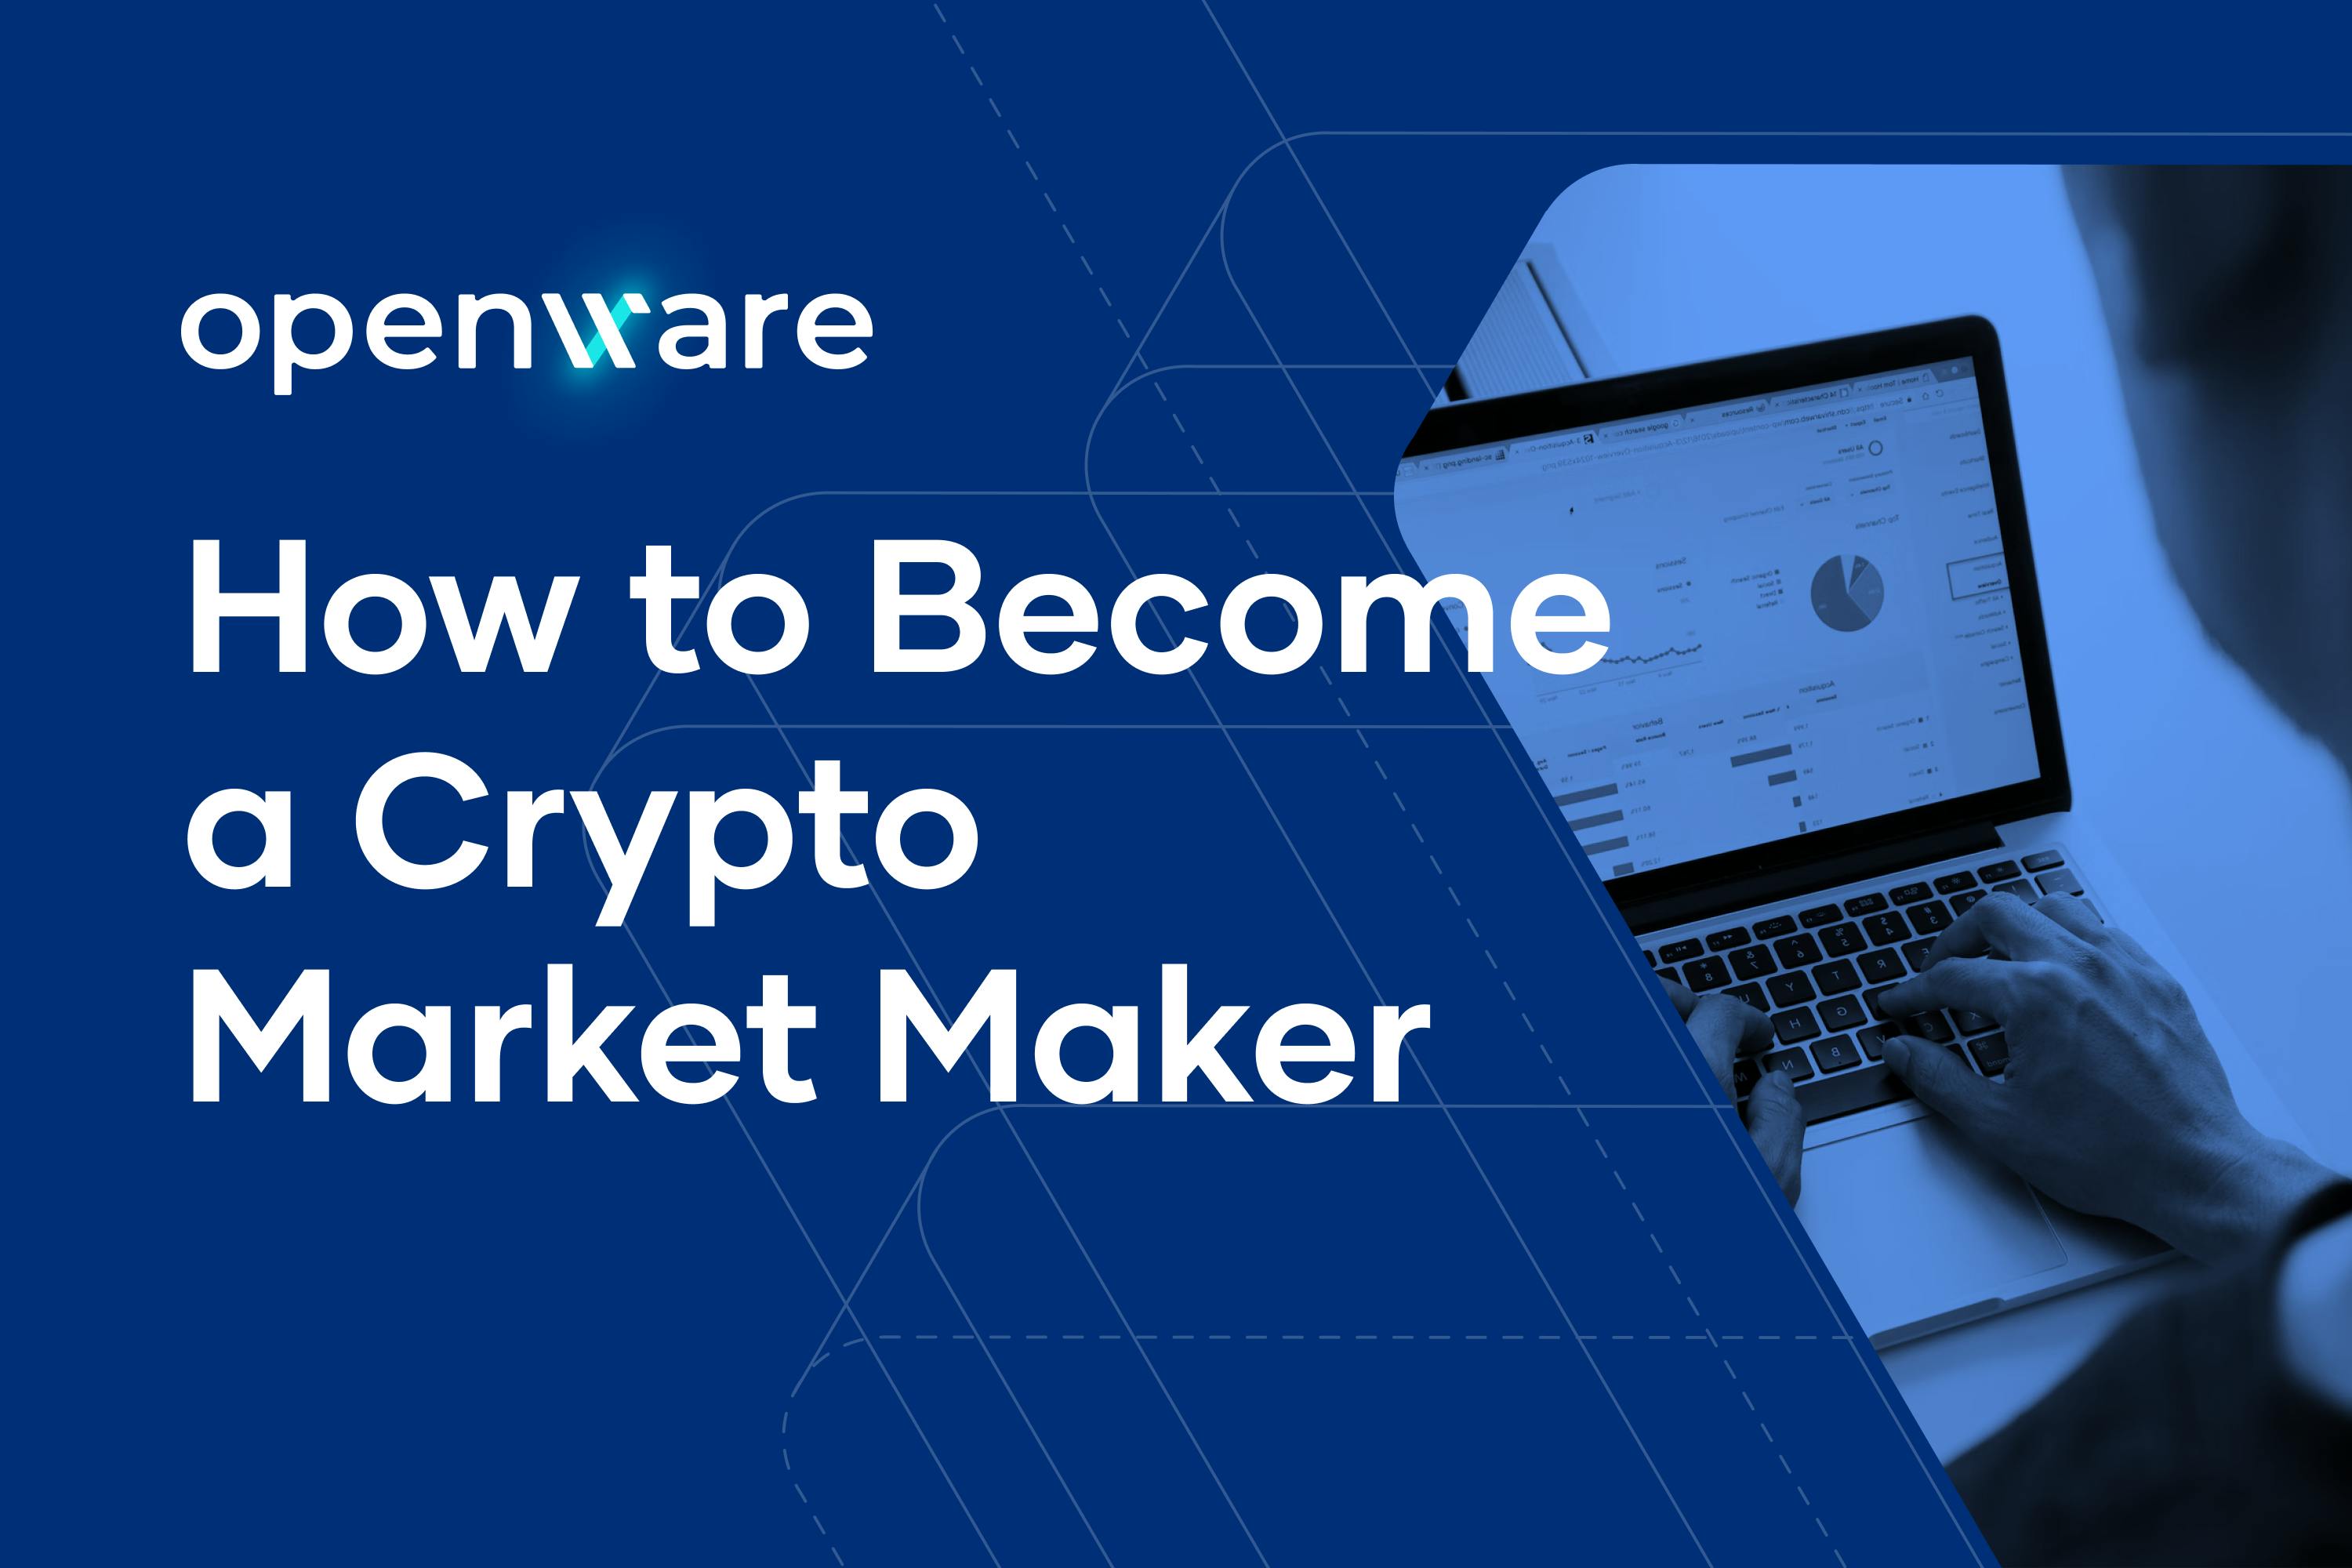 Banner Image showing the words "How to Become a Crypto Market Maker"